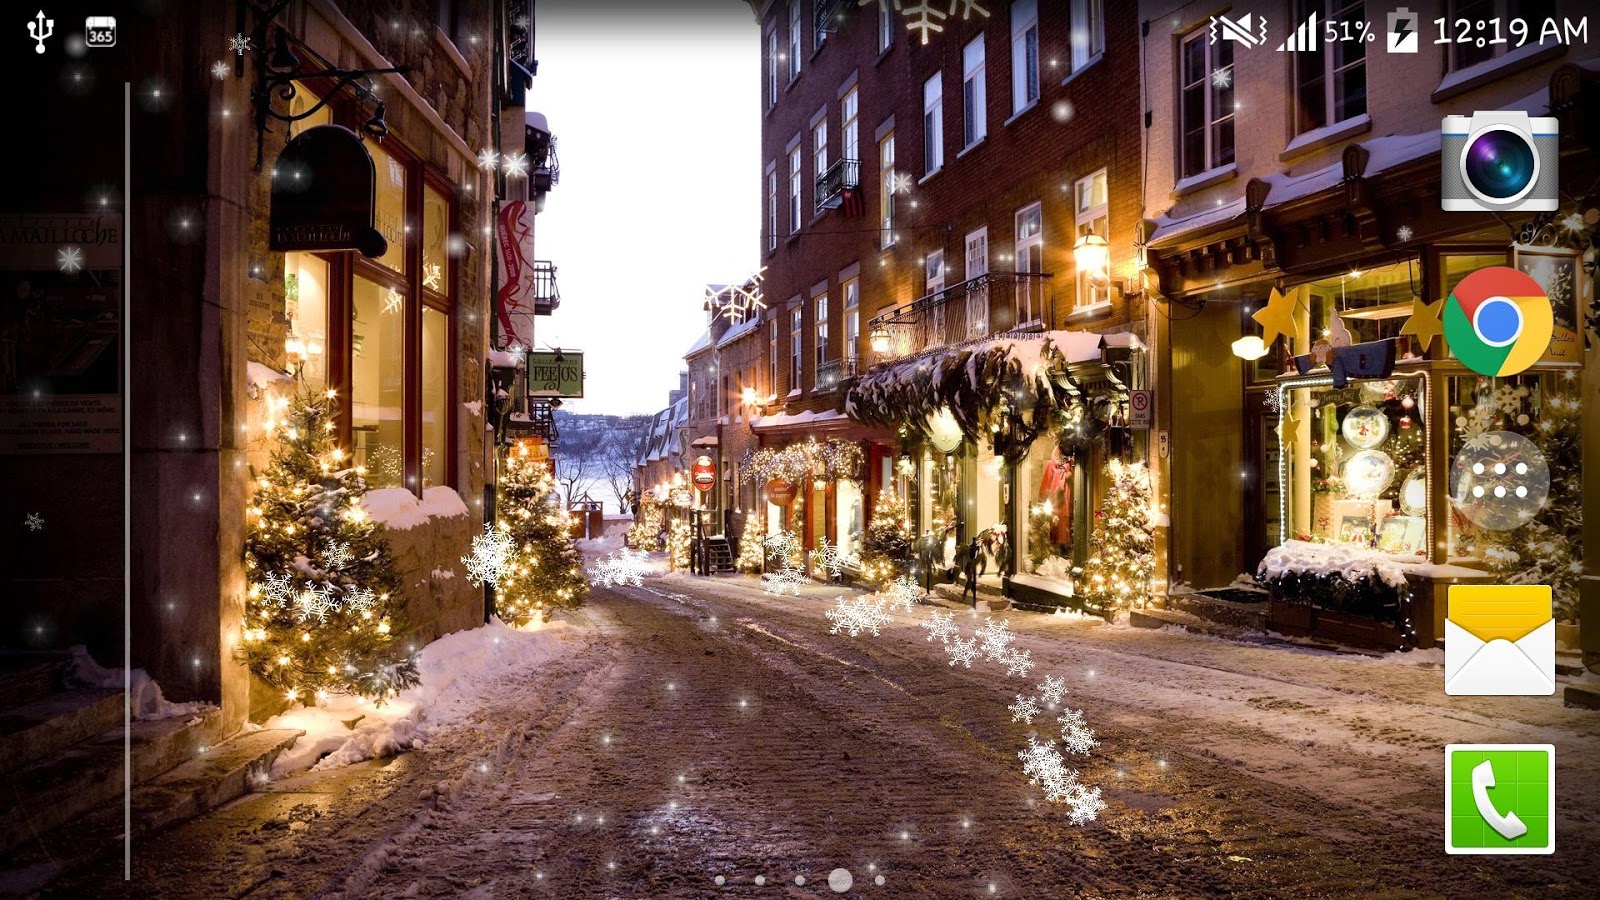 Snow Night City live wallpaper   Android Apps on Google Play